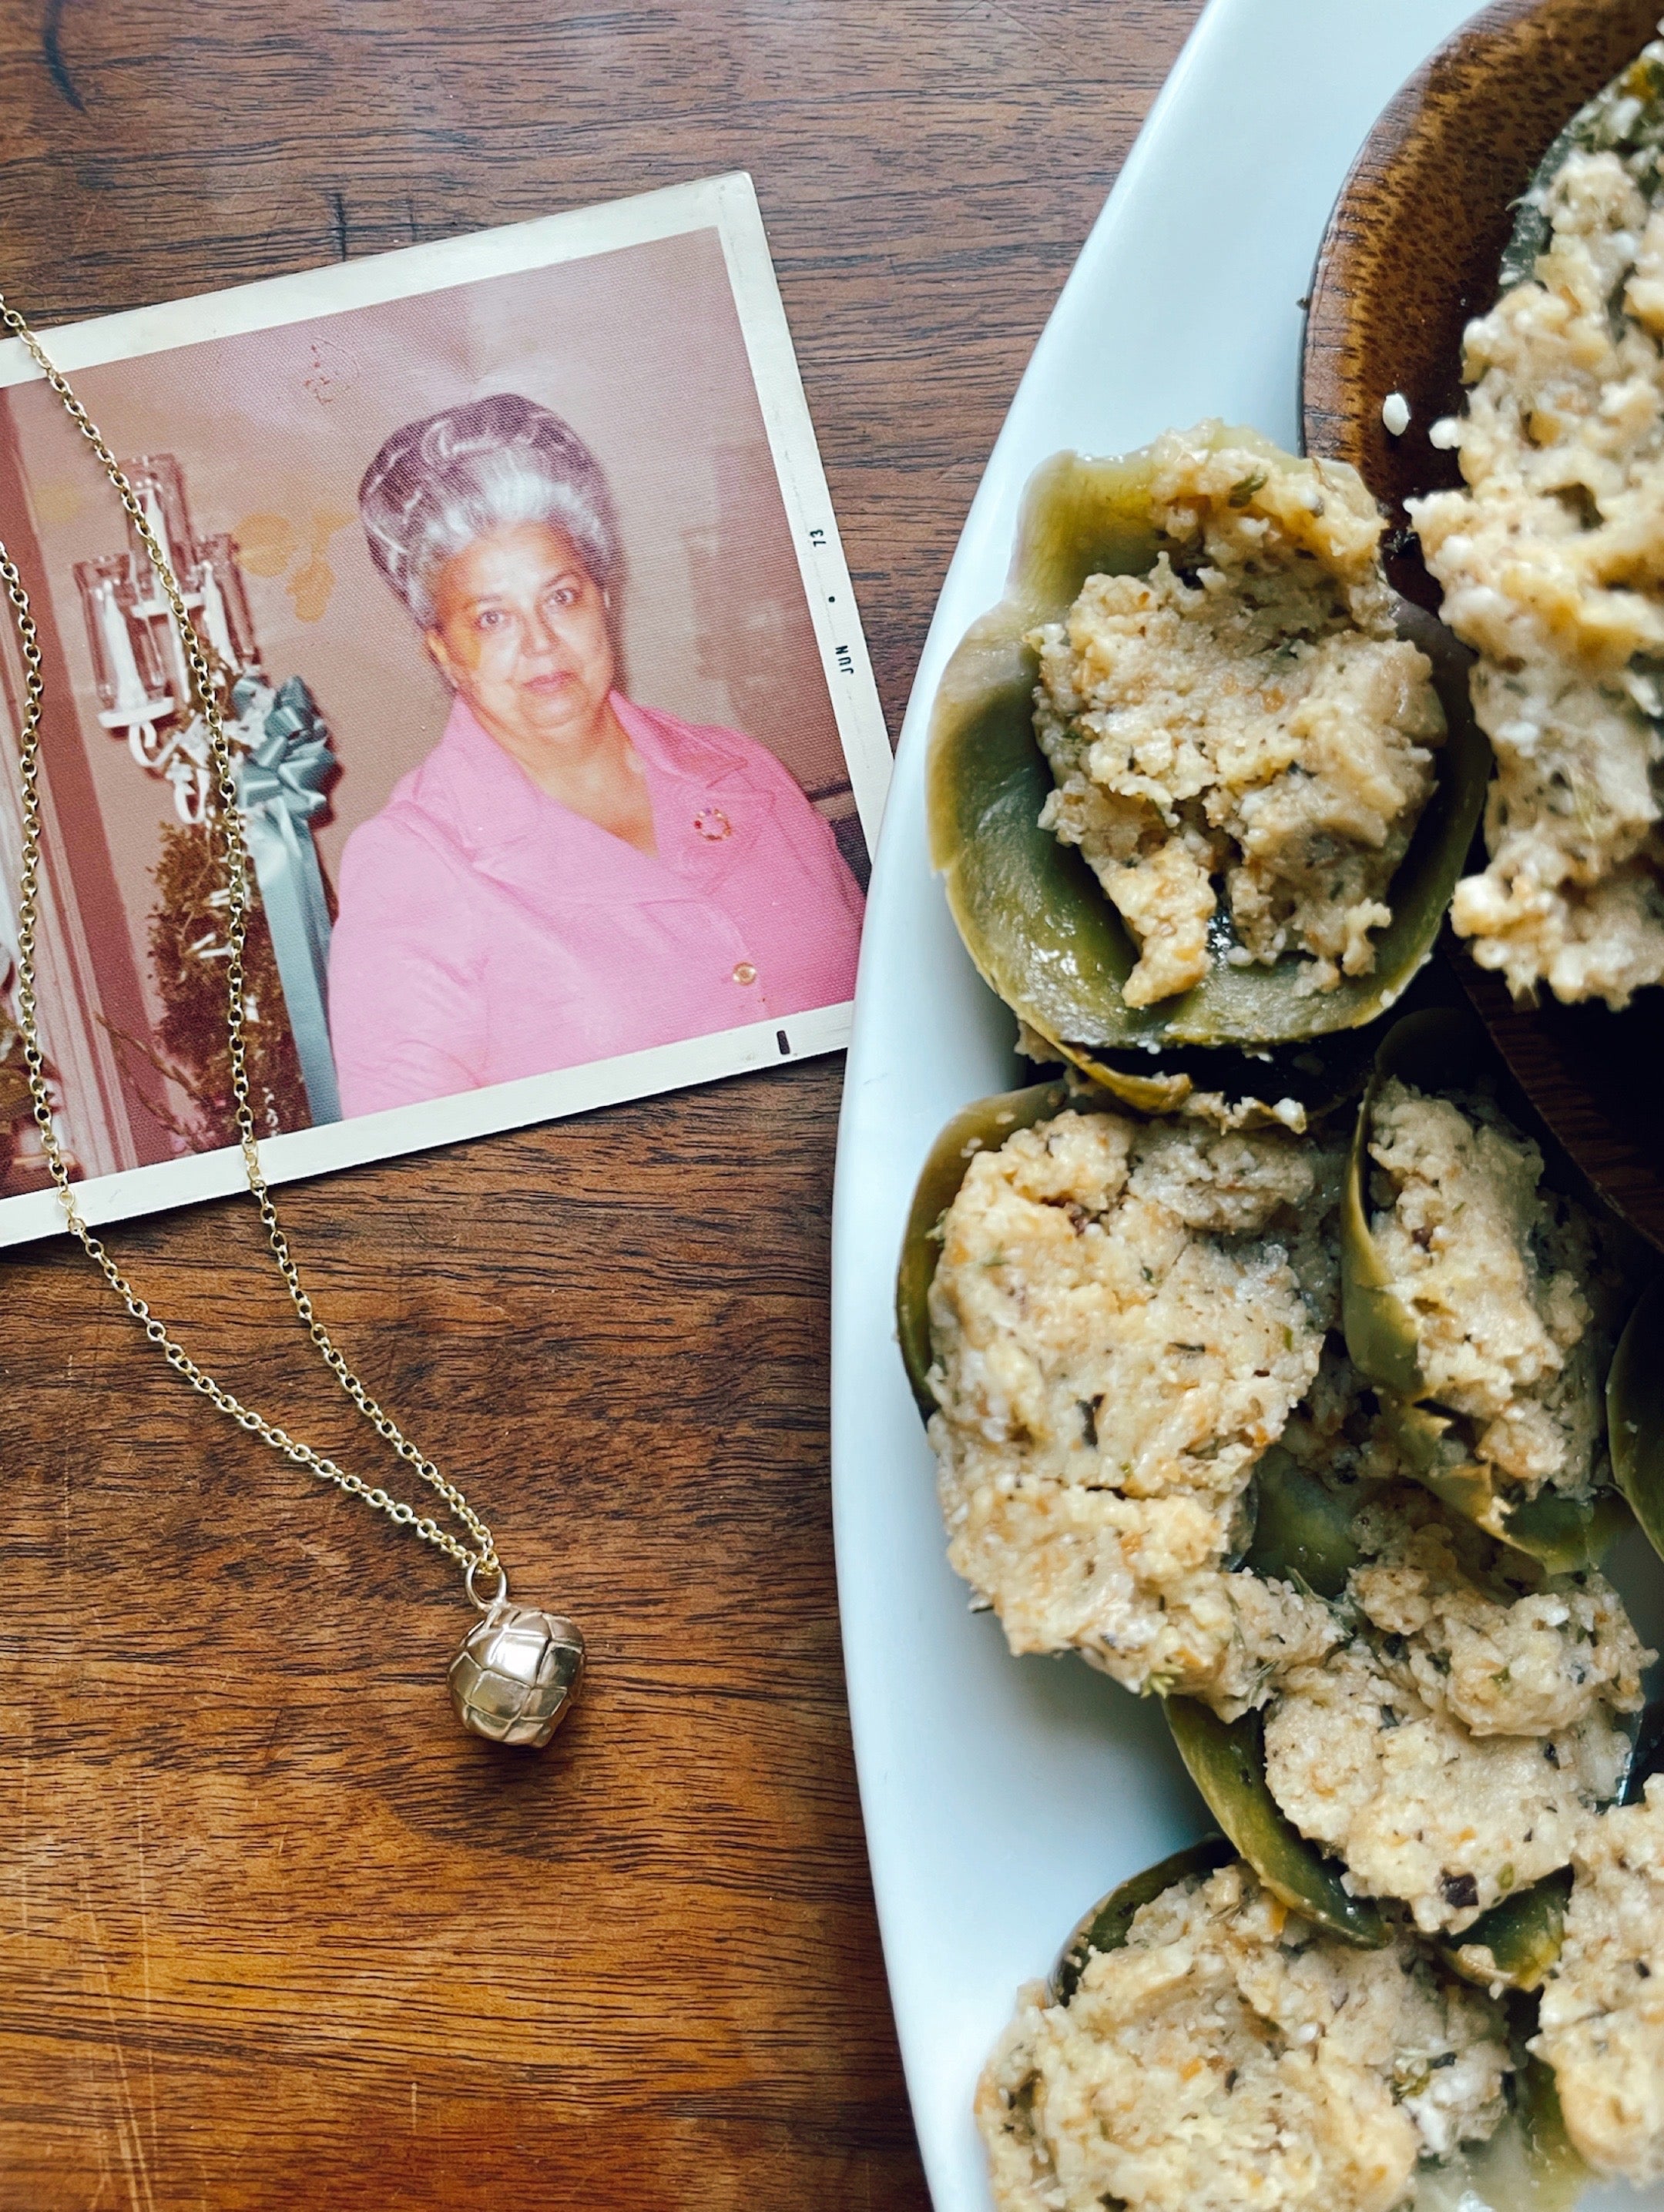 MIMOSA Shares Family Recipes And The Miniature Food Jewelry To Match